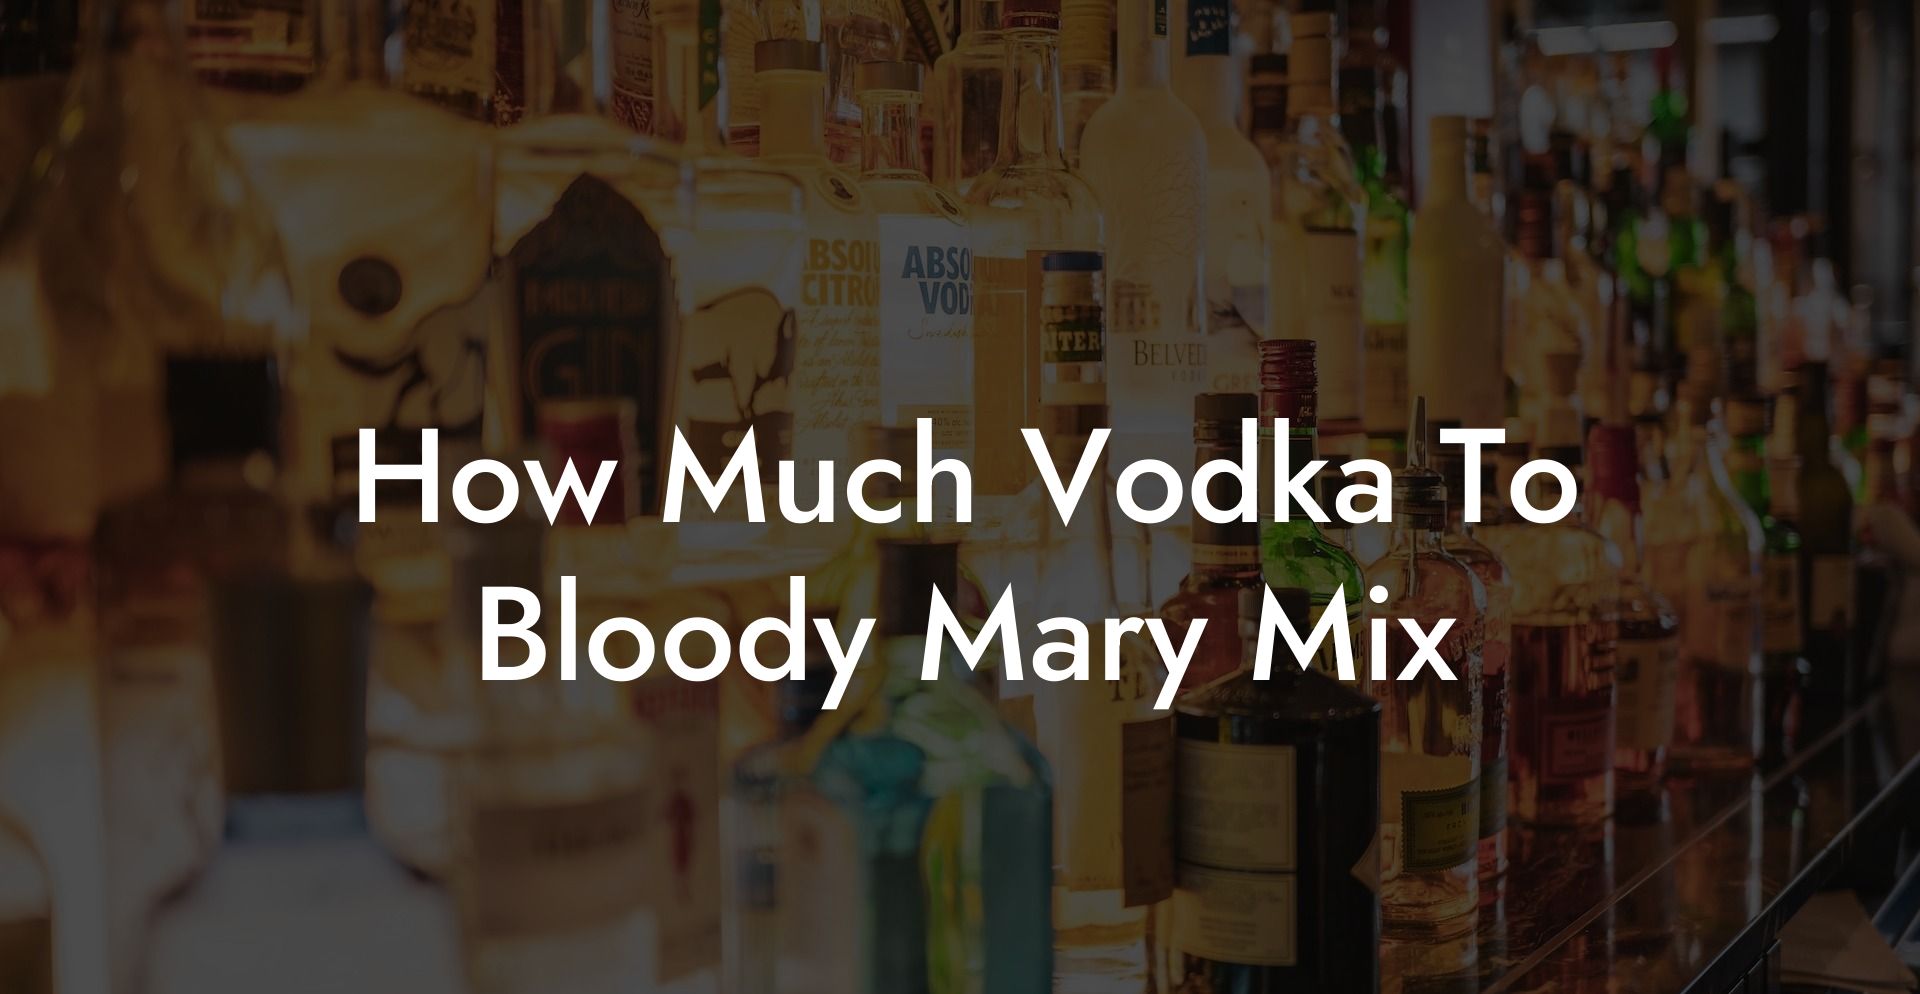 How Much Vodka To Bloody Mary Mix